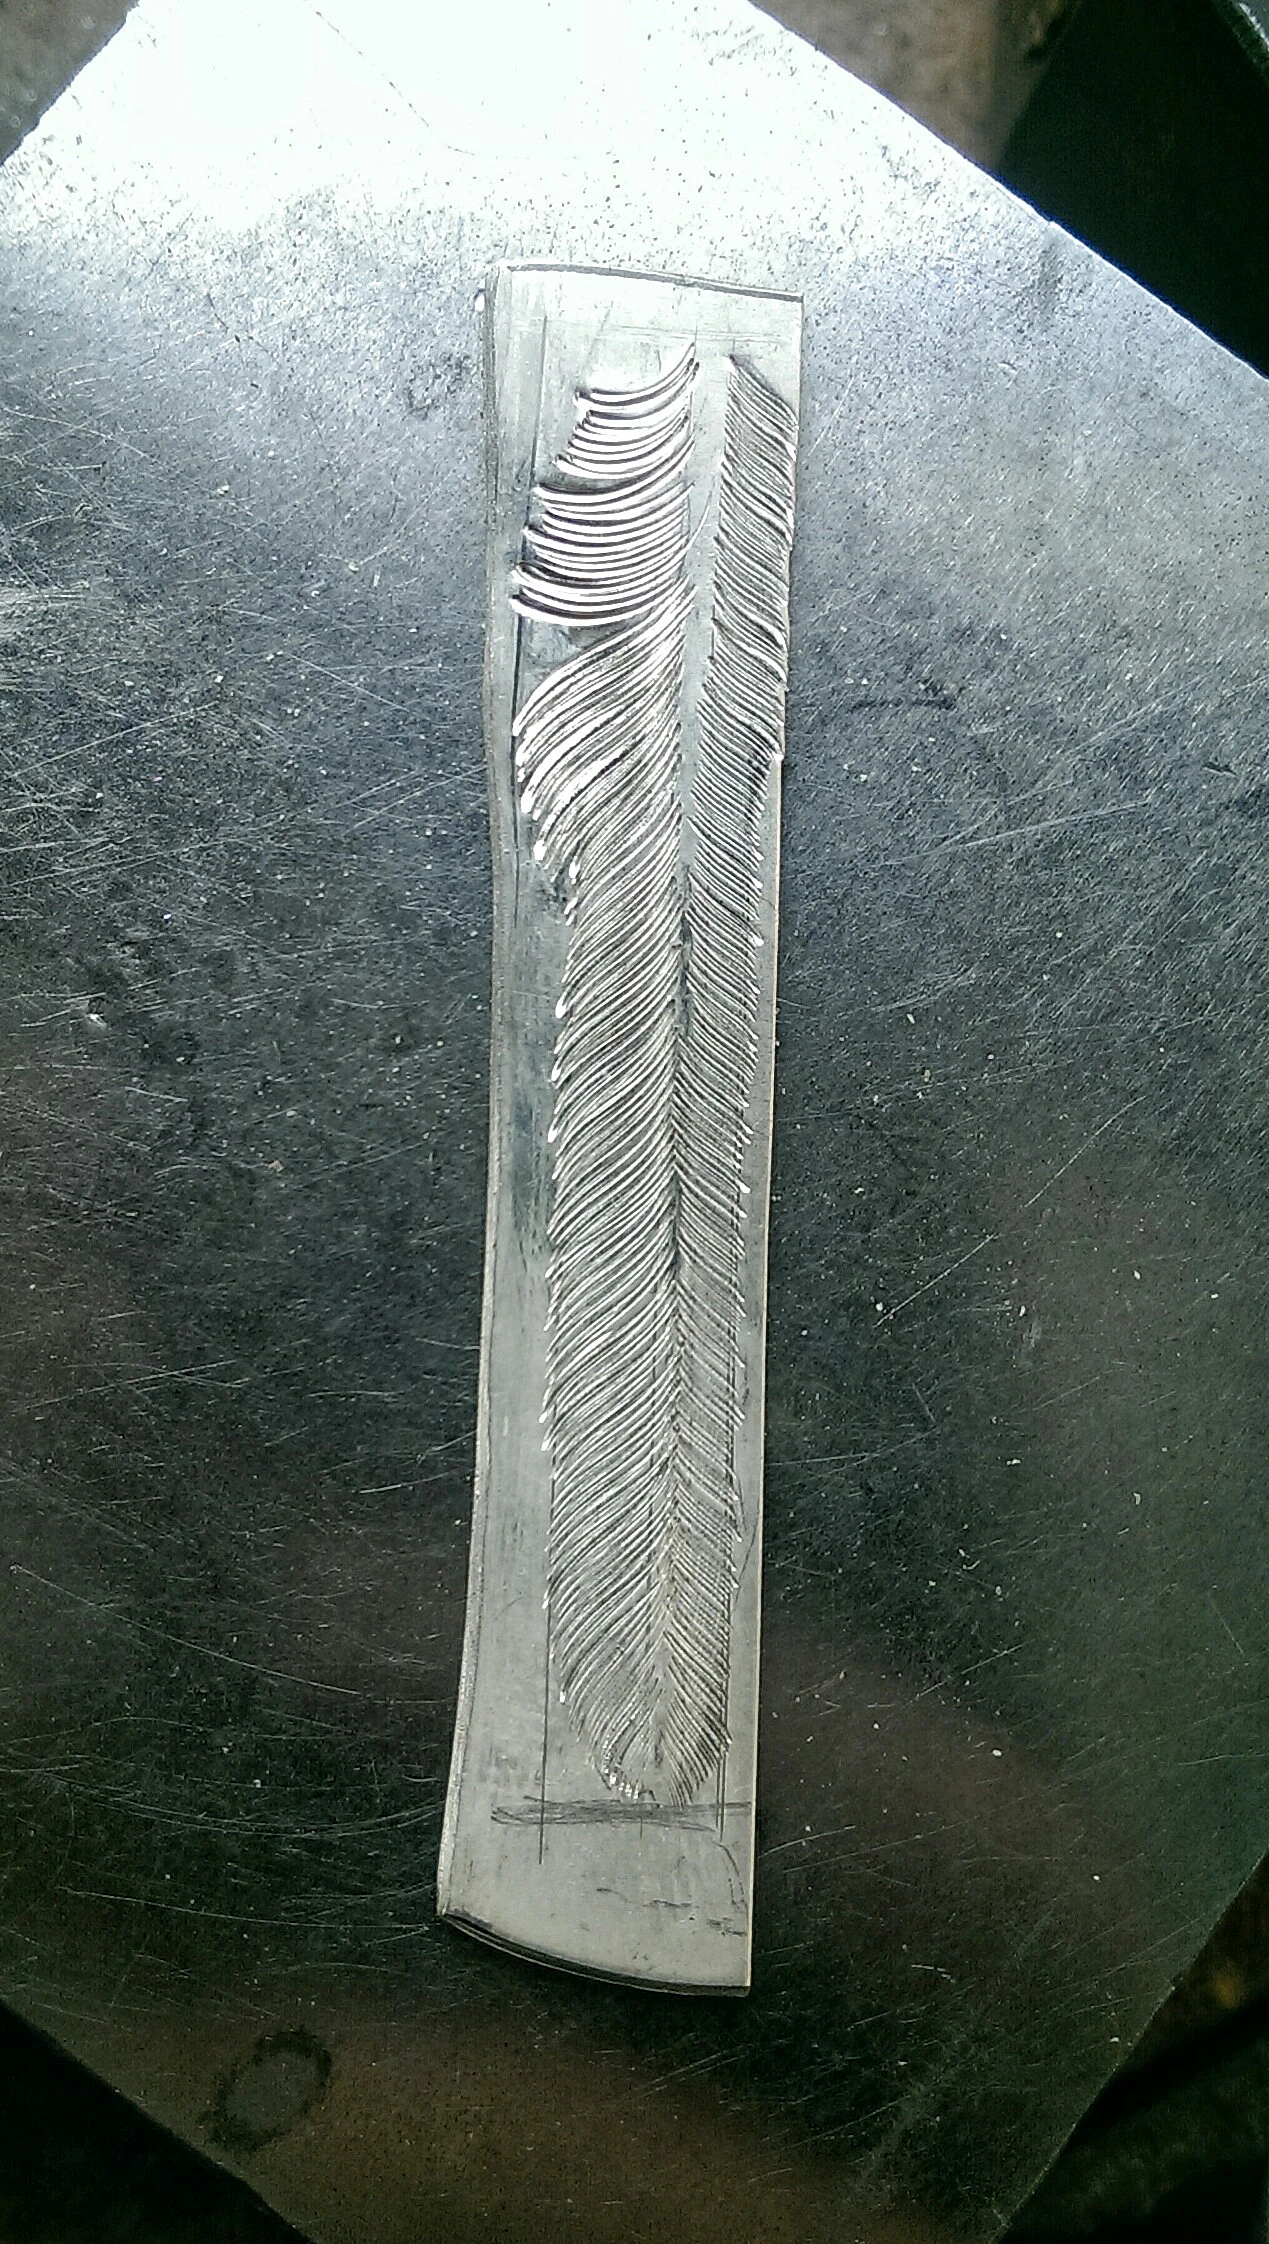 Primary Wing Feather